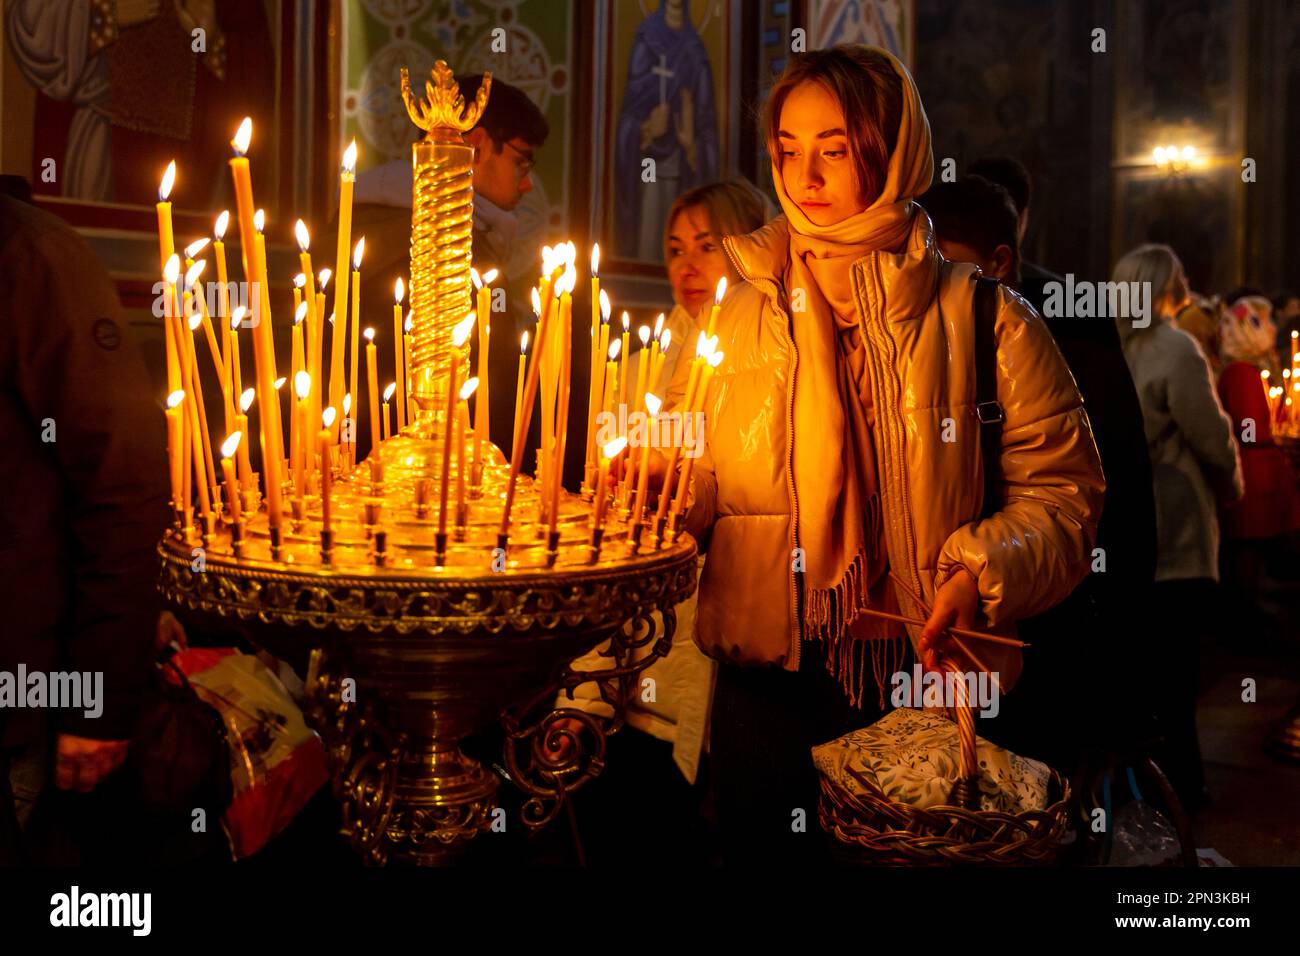 Ukrainian believers burn candles during the Holy Saturday celebrations in St. Michael's Golden-Domed Monastery in central Kyiv, the capital of Ukraine on April 16, 2023. According to the tradition the faithful bring their Easter food in a basket to be purified, it always is Pasha (Easter bread), painted egg (pysanka) among other. Most of Ukrainians are Orthodox Christians or Greek Catholic Christians, both observe the eastern rite of Easter. Kyiv remains relatively peaceful as the Russian invasion continuous and Ukraine prepares for a spring counter-offensive to retake Ukrainian land occupied Stock Photo